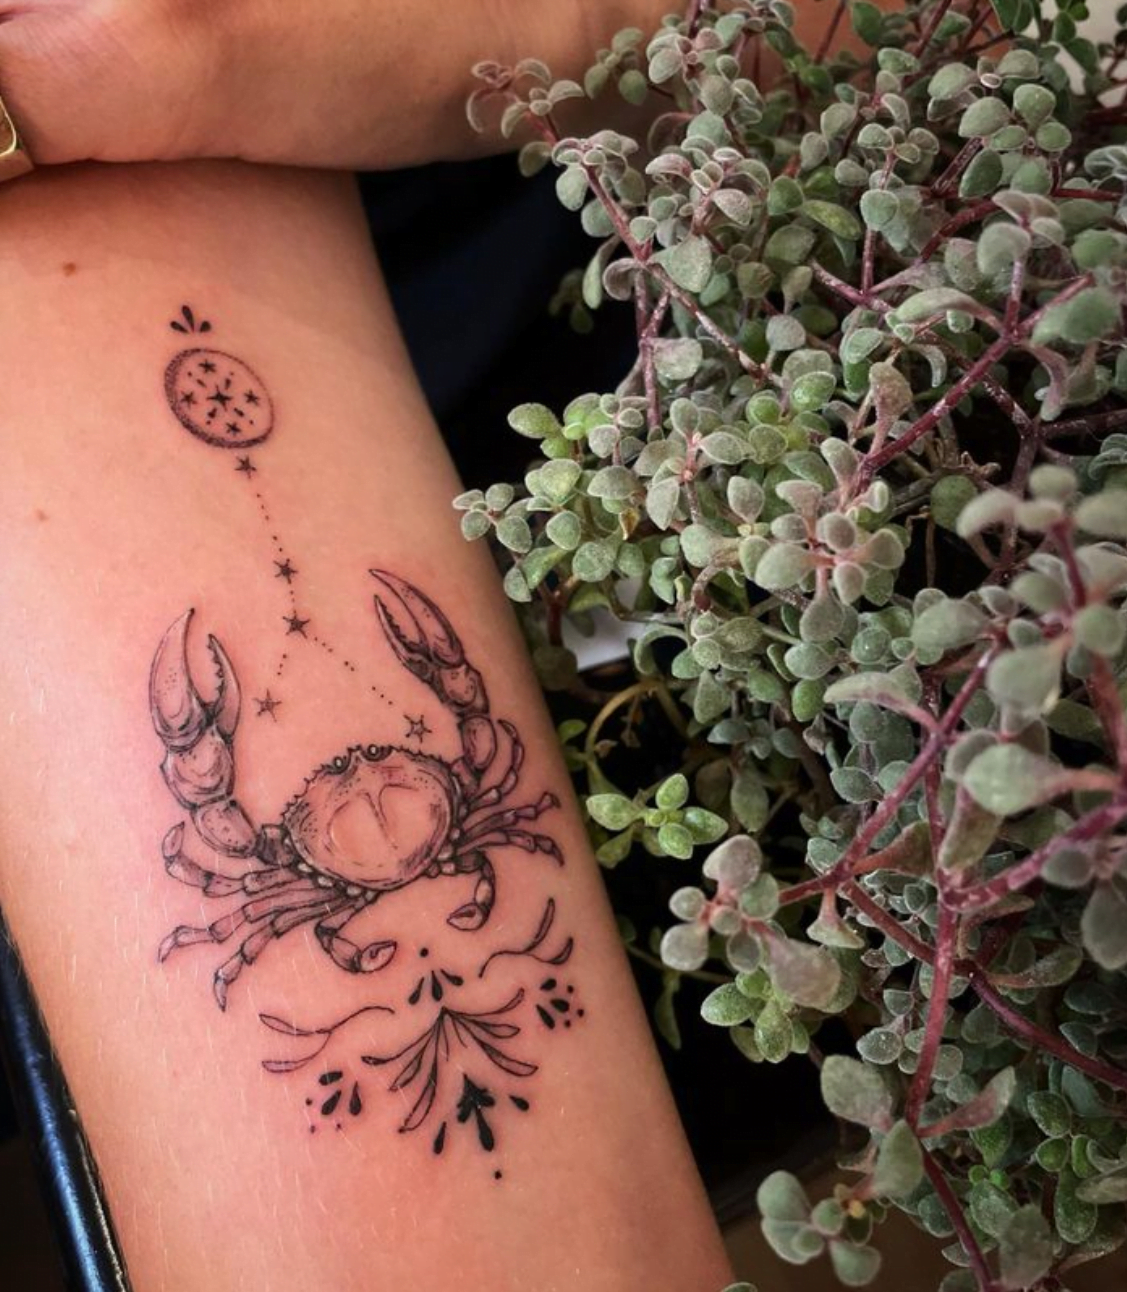 Cancer tattoos mark milestones but know the risks - The Life Raft Group